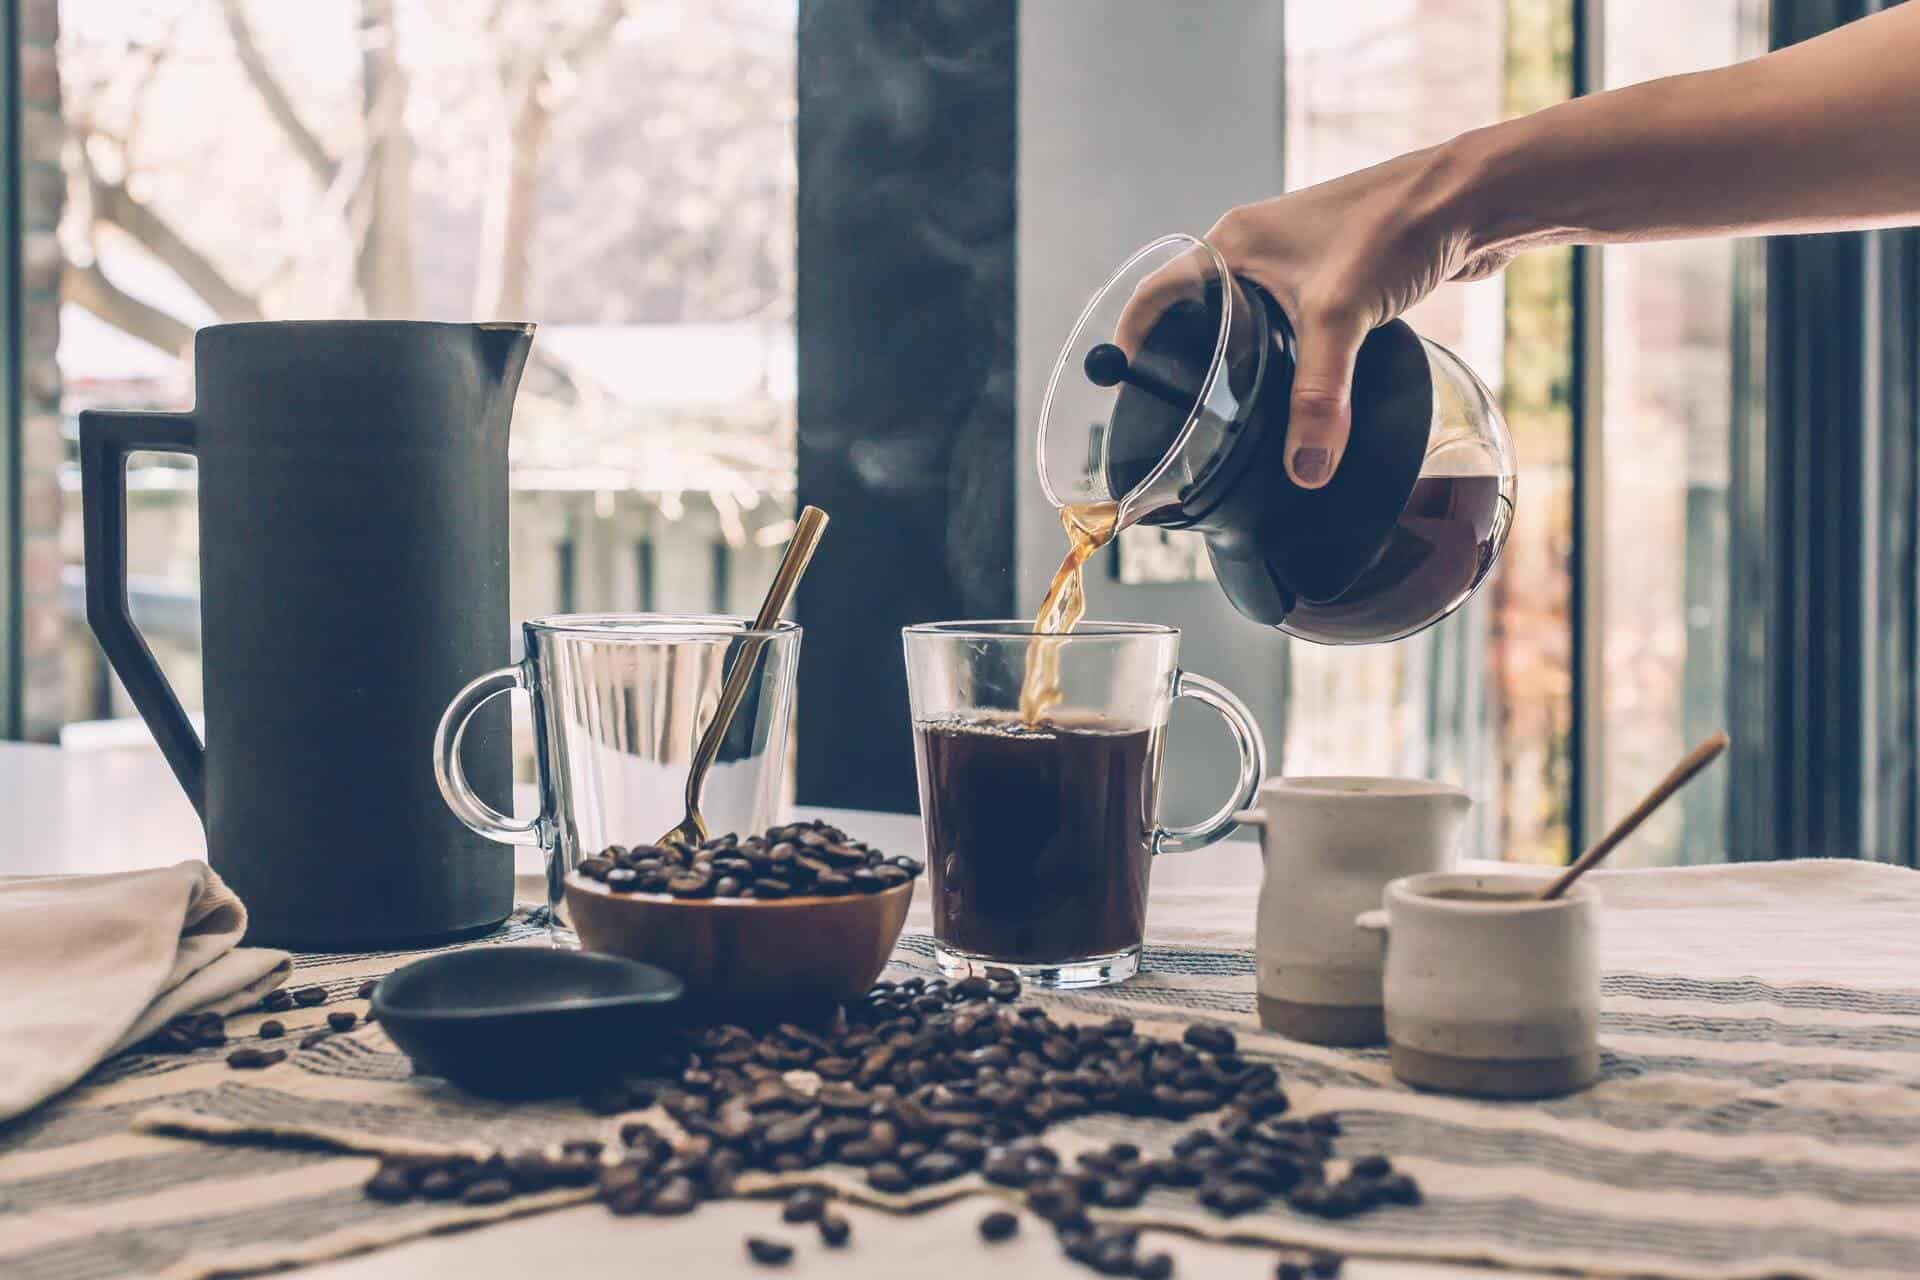 6 Unusual Coffee Brewing Methods You Can Try At Home